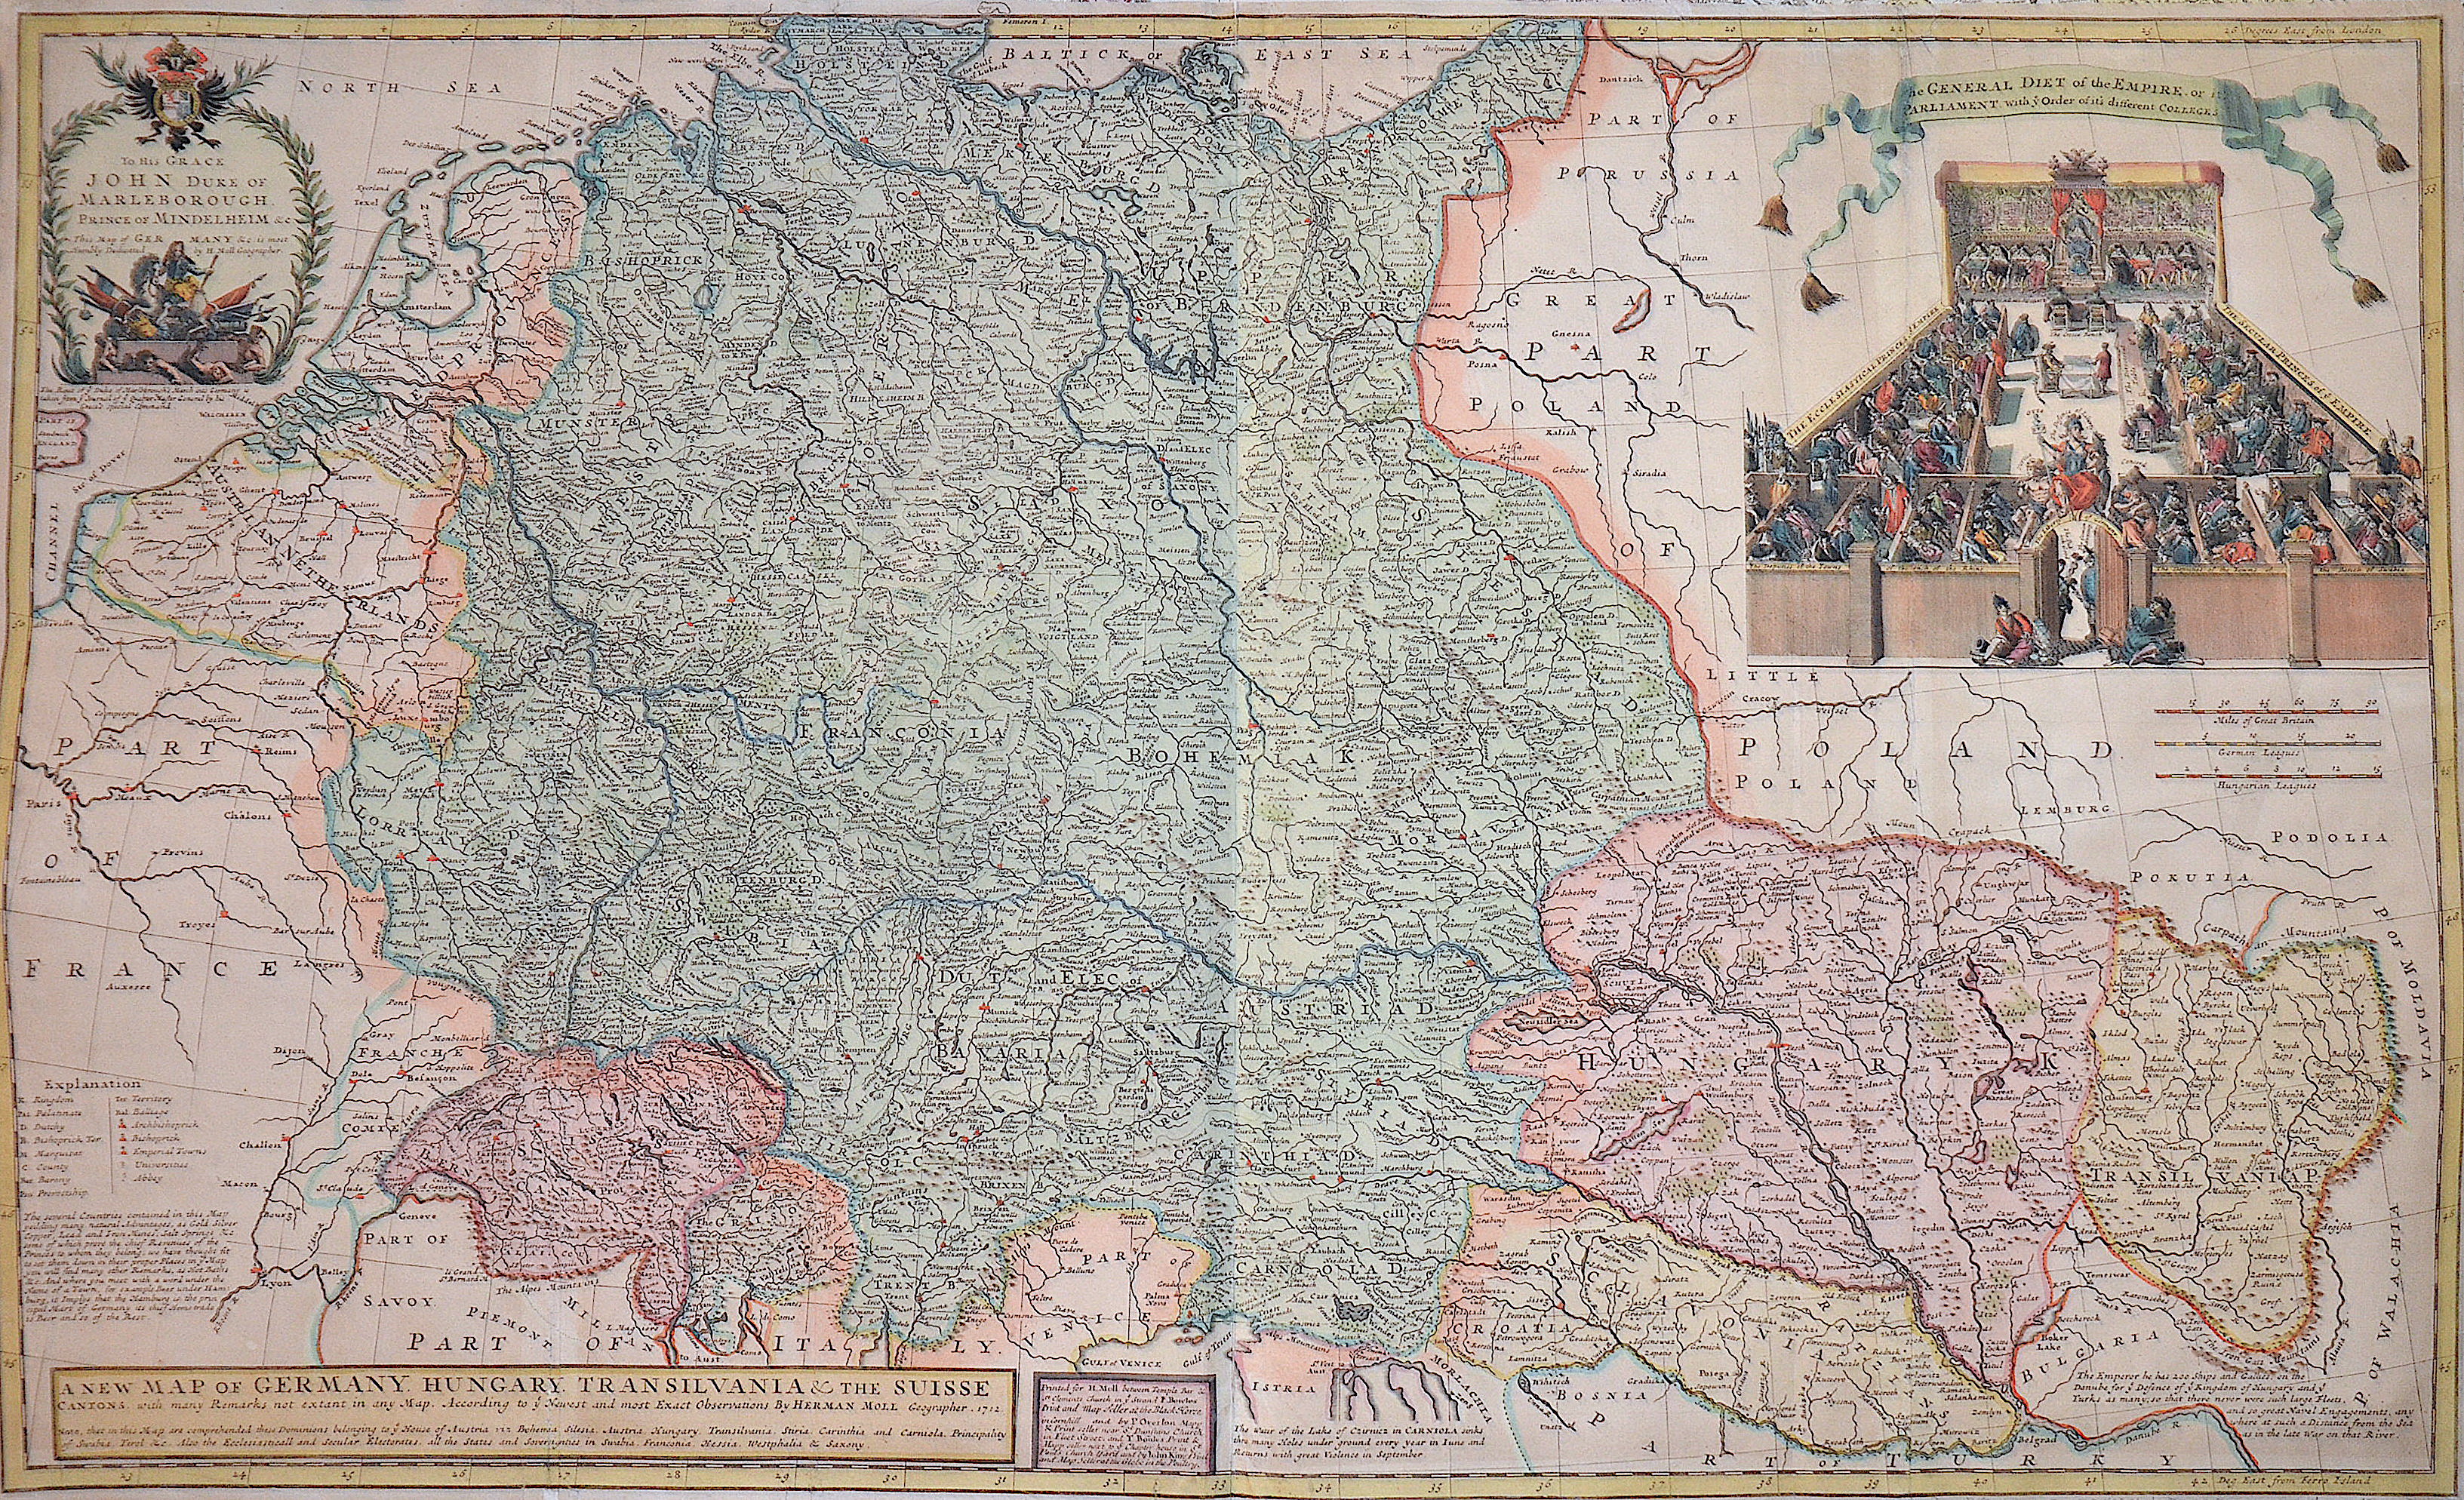 Moll  A new map of Germany. Hungary. Transivania and the Suisse Cantons……..